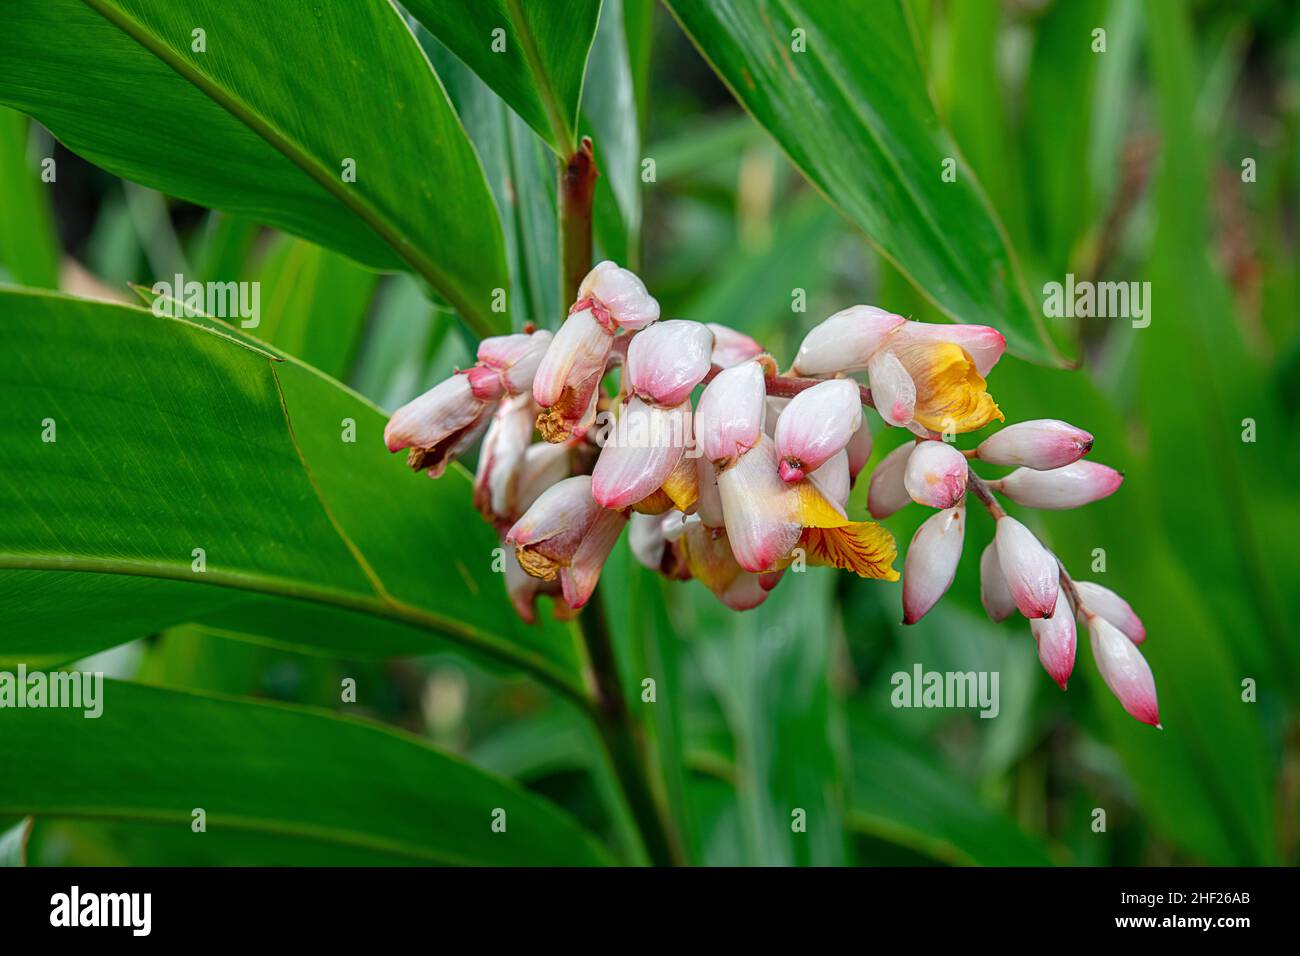 Cluster of alpinia zerumbet or shell ginger, tropical flora with unusual yellow flowers emerging from waxy white and pinkish shells Stock Photo